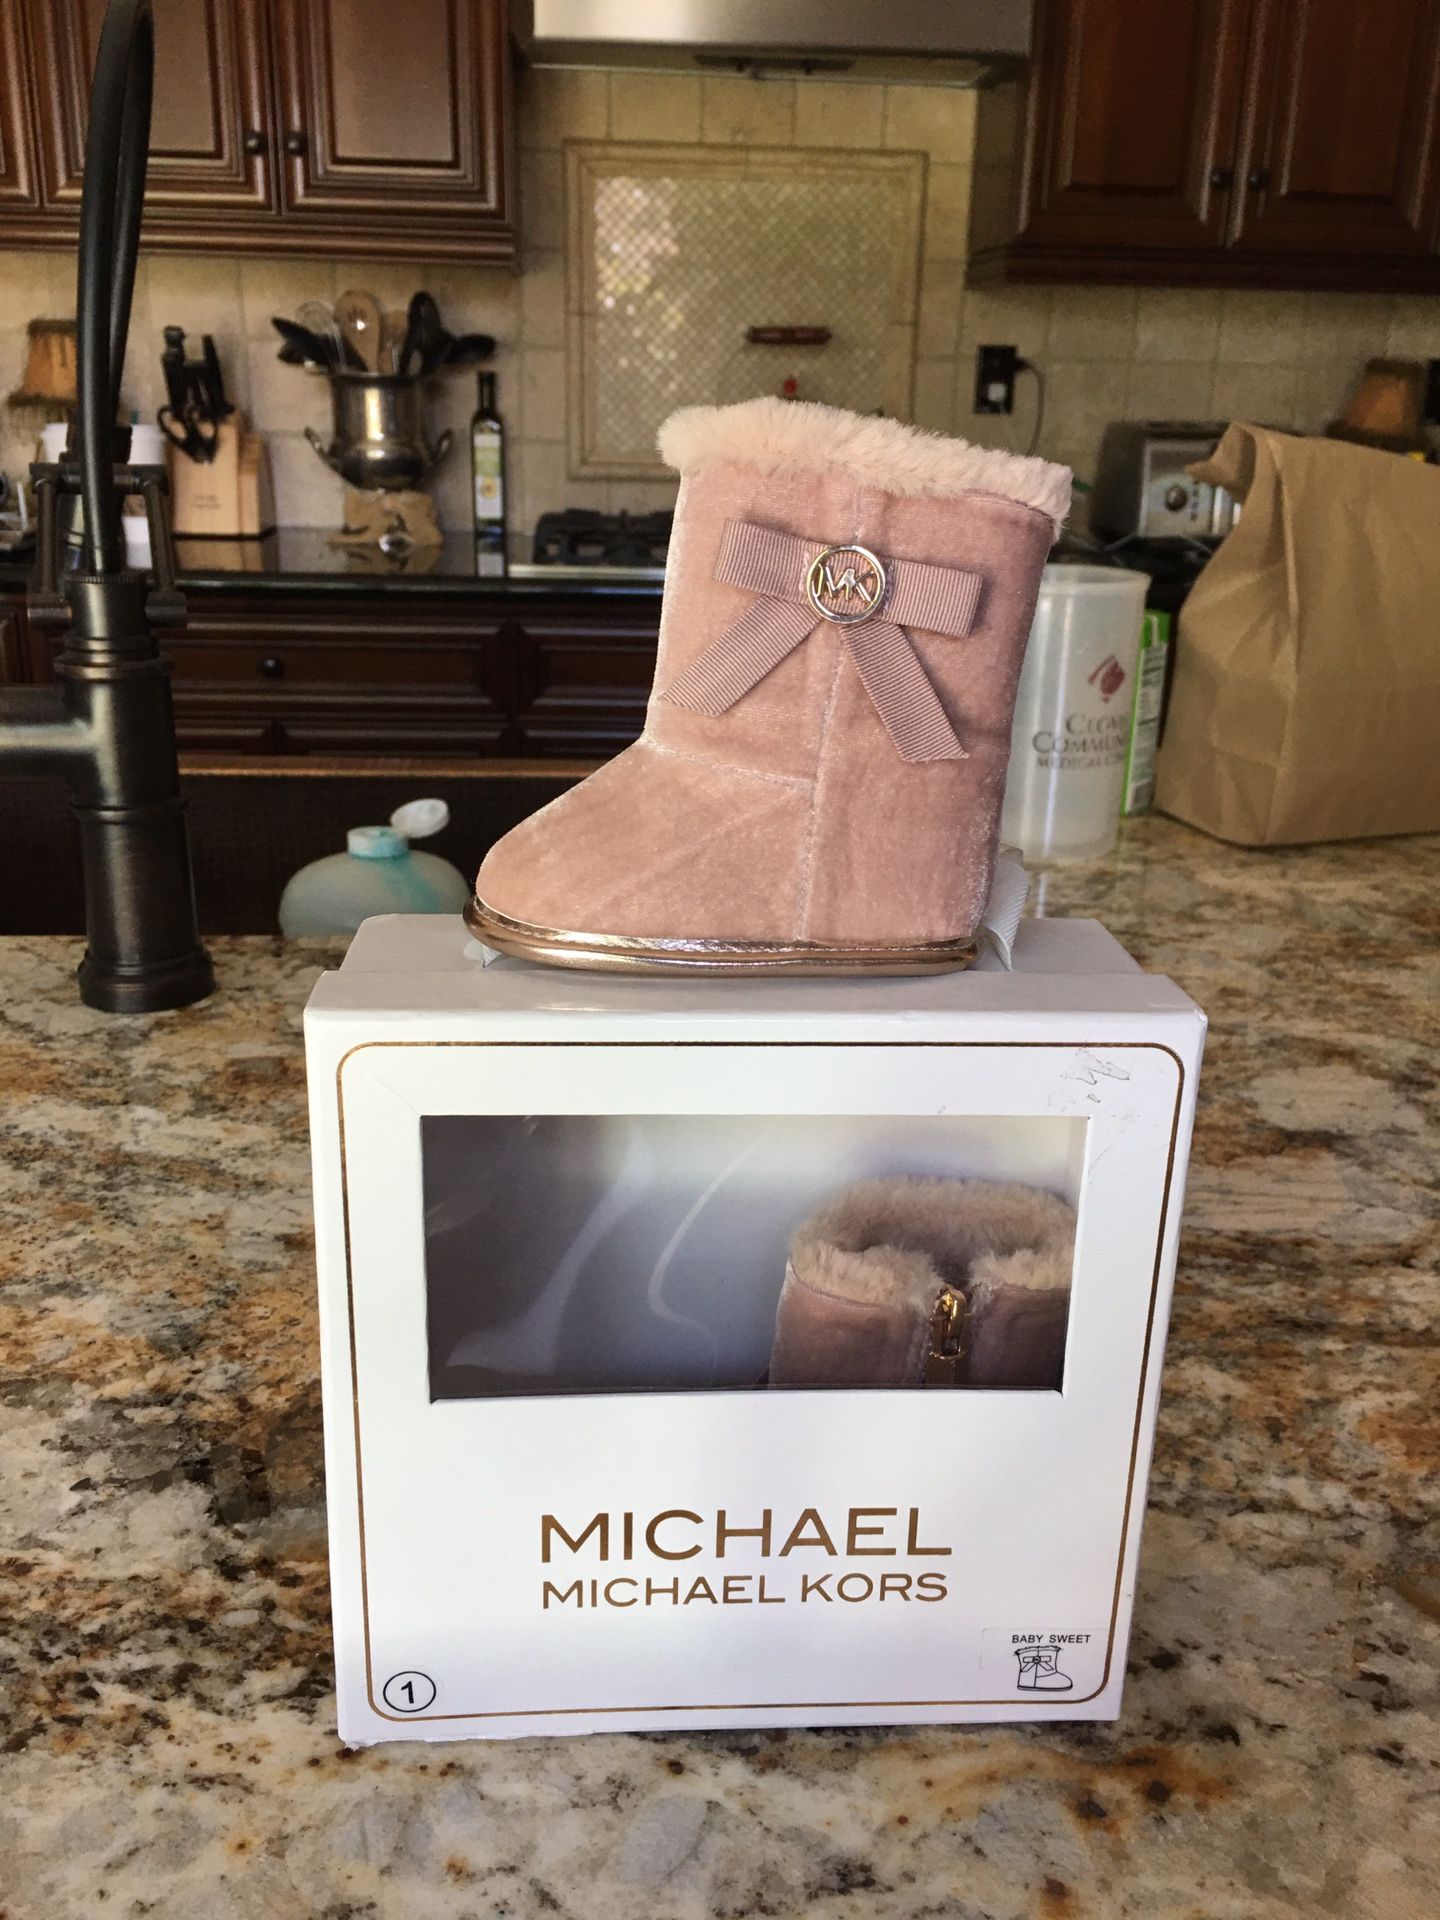 Brand new Michael kors boots in box size 1 infant